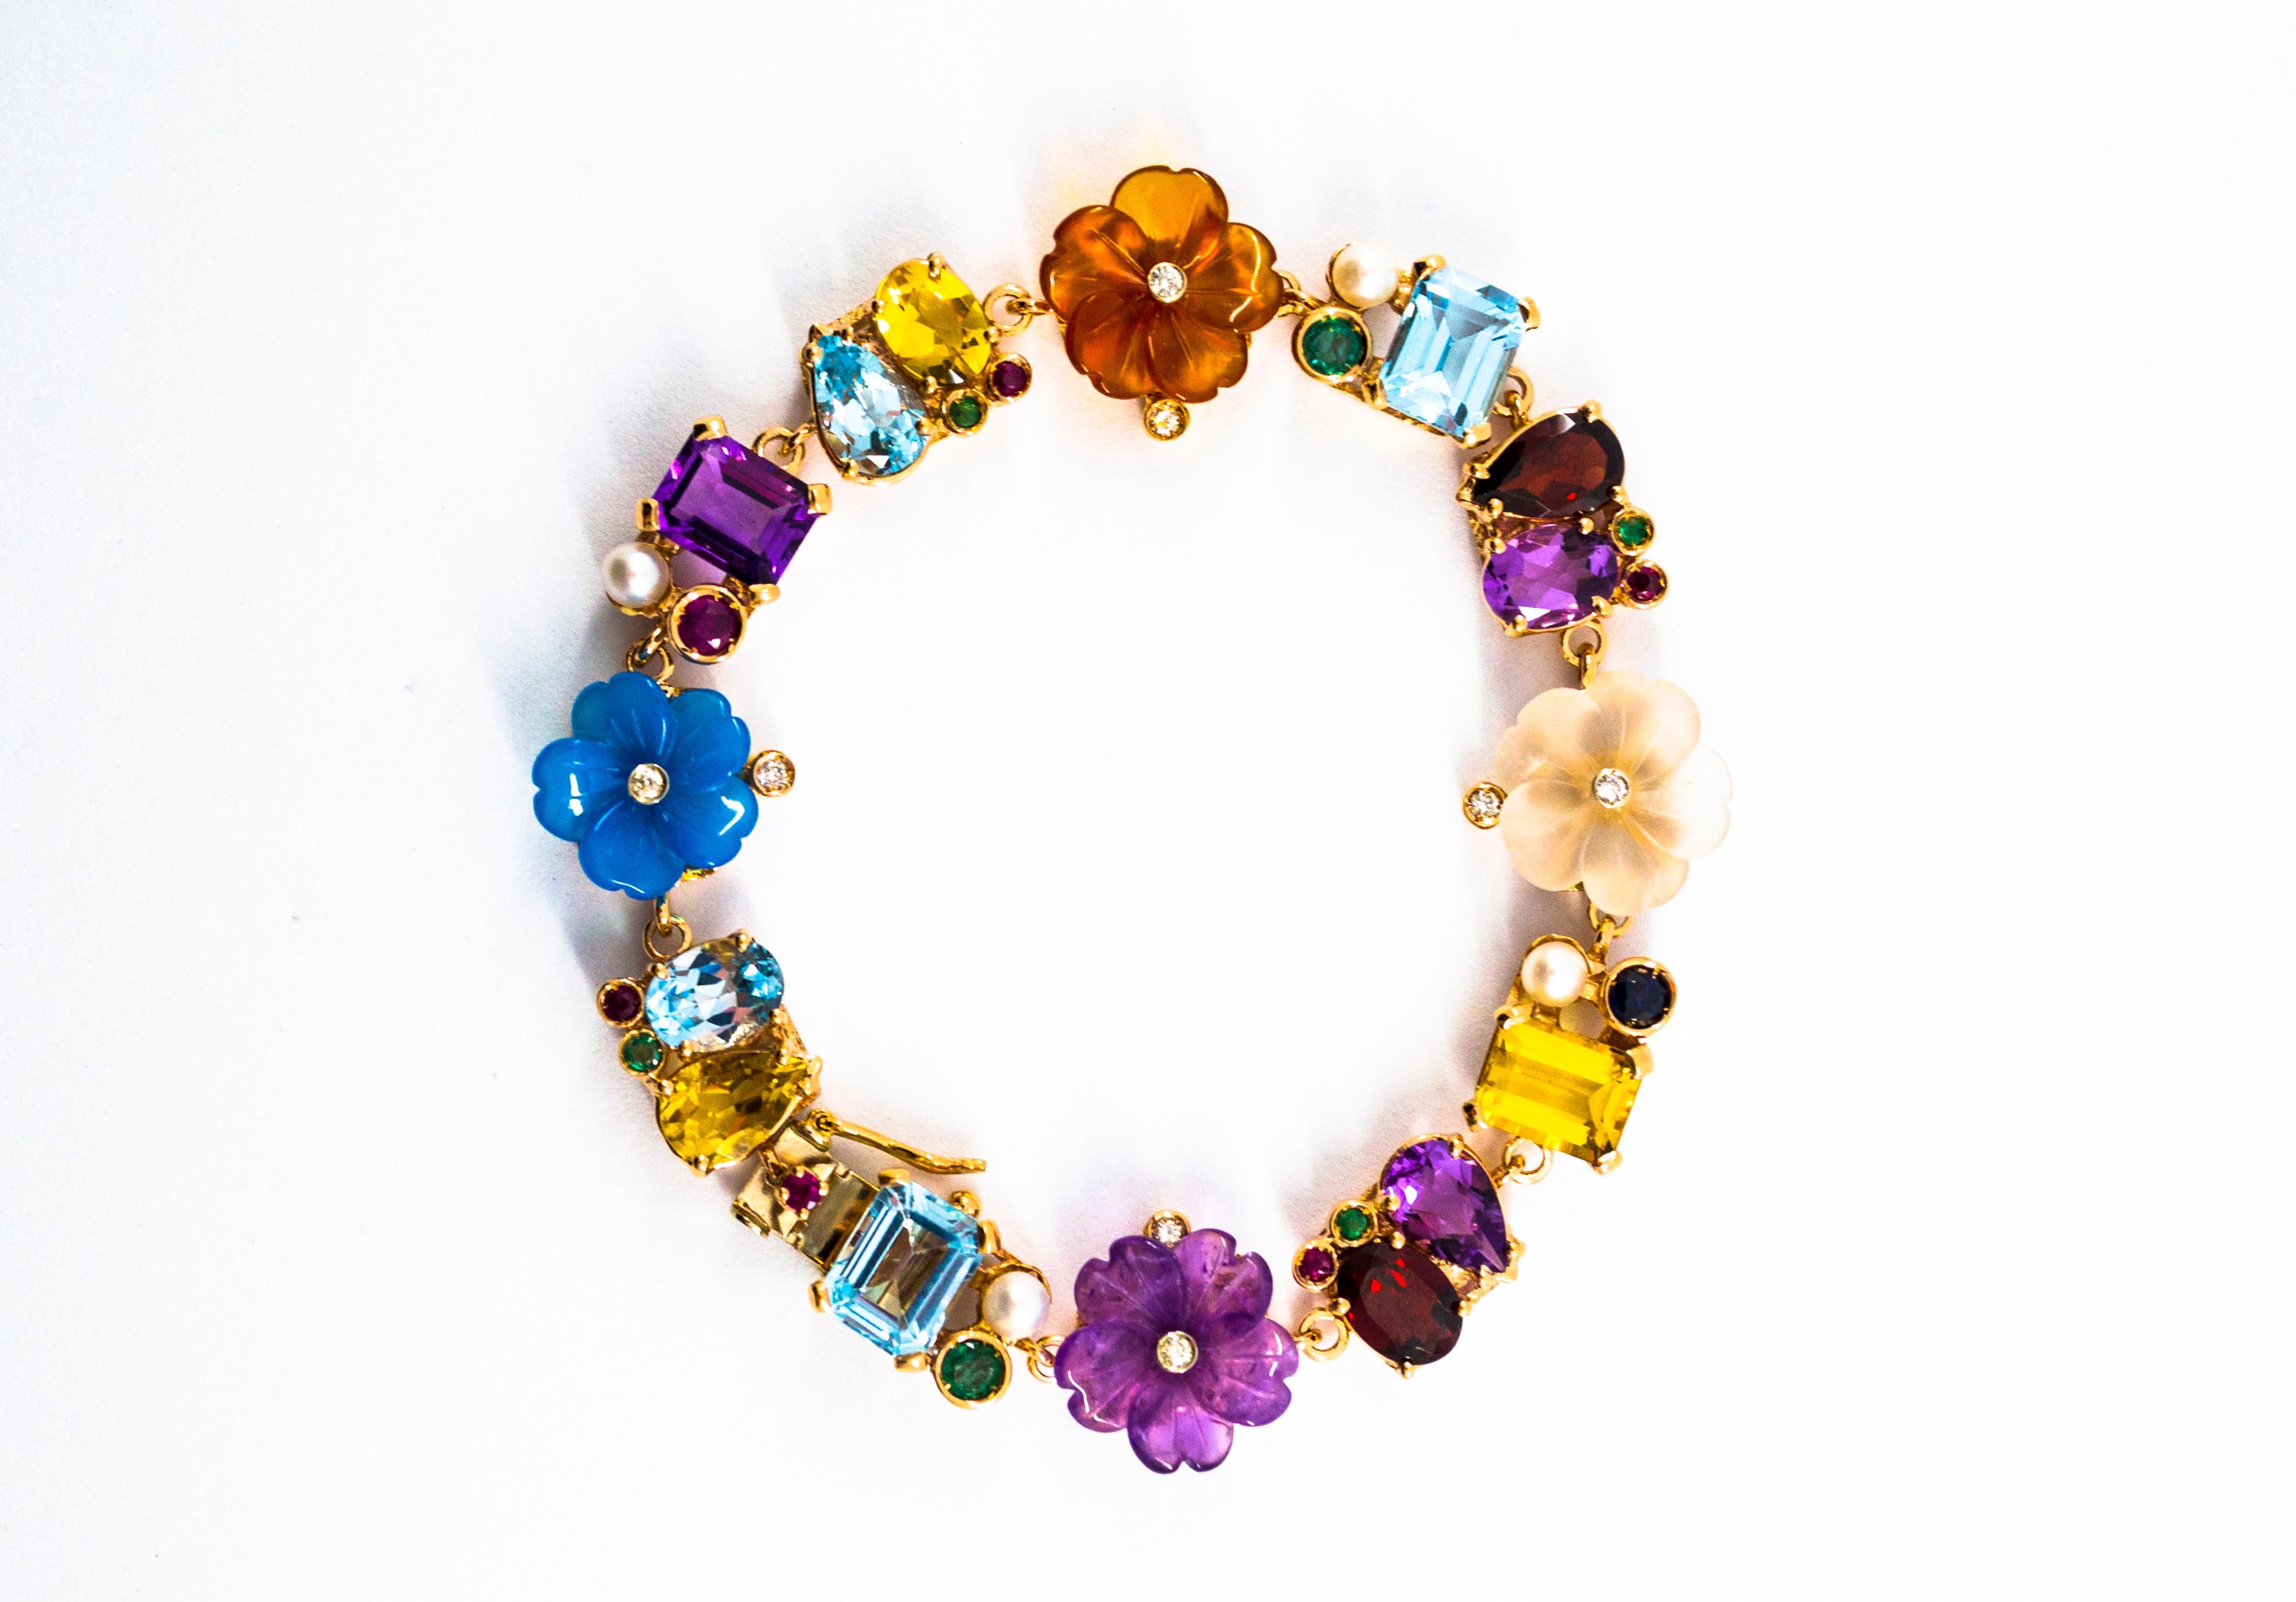 This Bracelet is made of 14K Yellow Gold but we can make it also in 9 or 18K Yellow Gold.
This Bracelet has 0.20 Carats of White Modern Round Cut Diamonds.
This Bracelet has 0.90 Carats of Blue Sapphires, Rubies and Emeralds.
This Bracelet has also